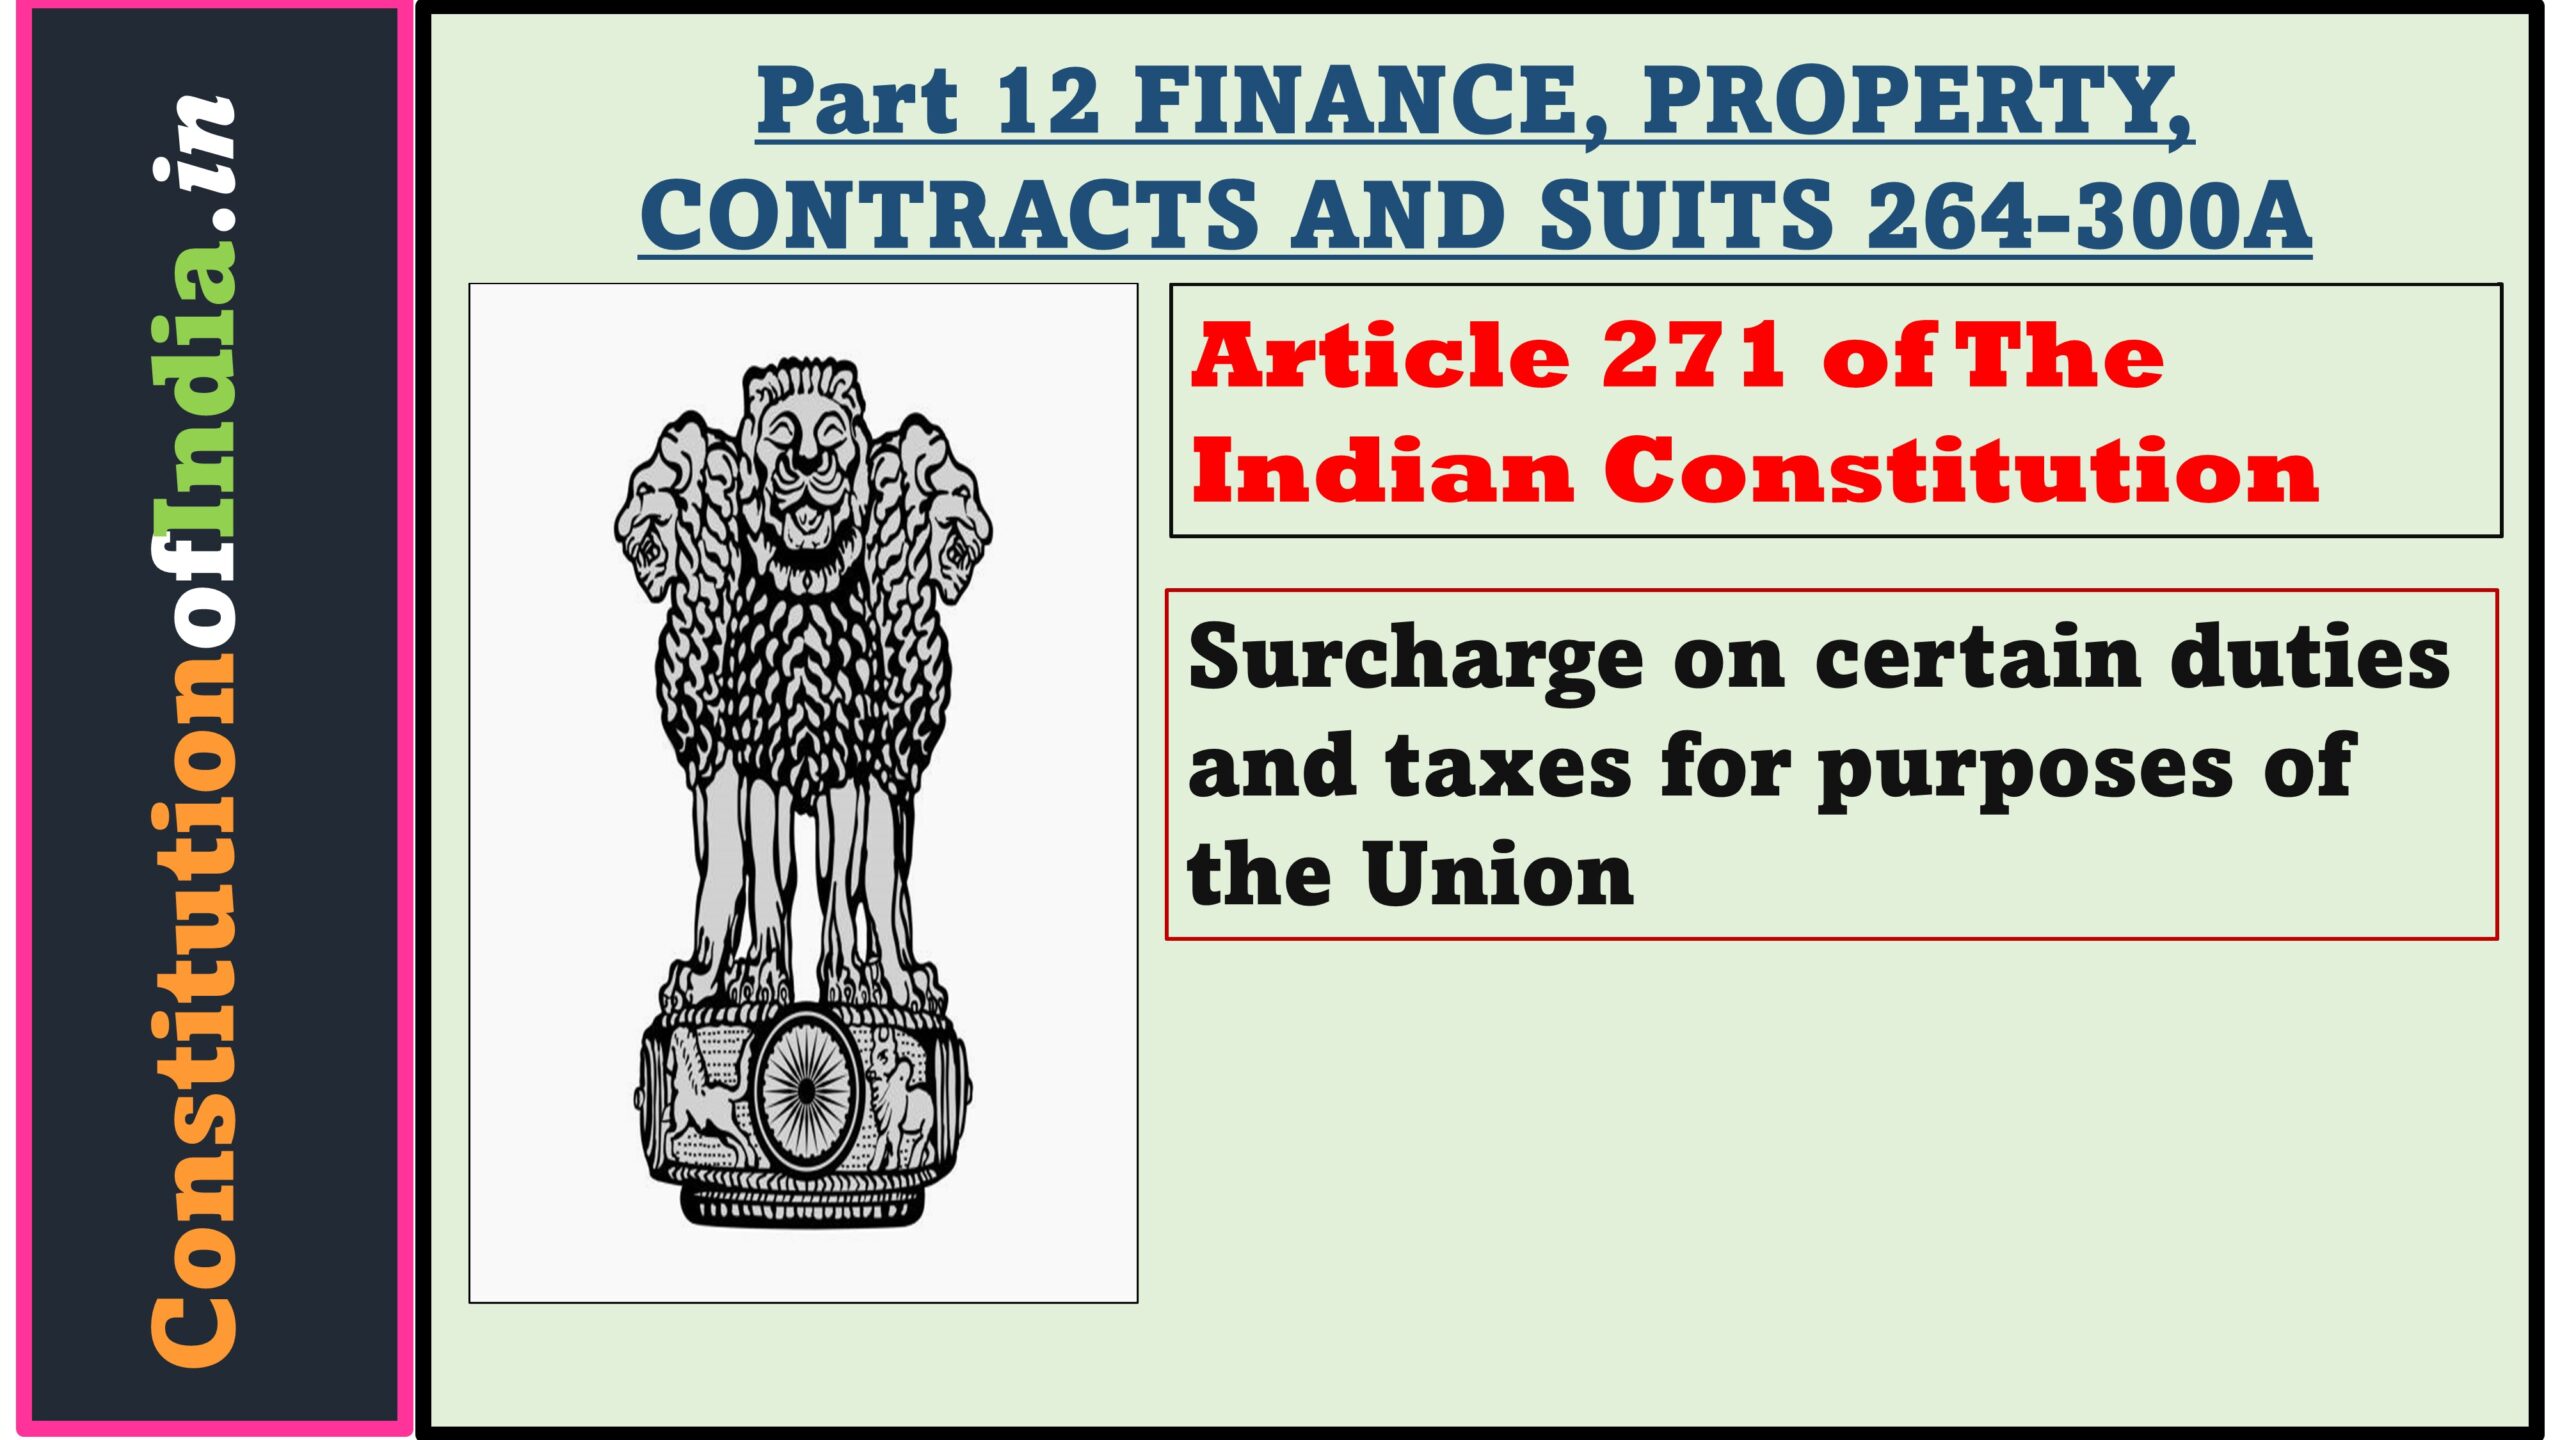 Article 271 of The Indian Constitution